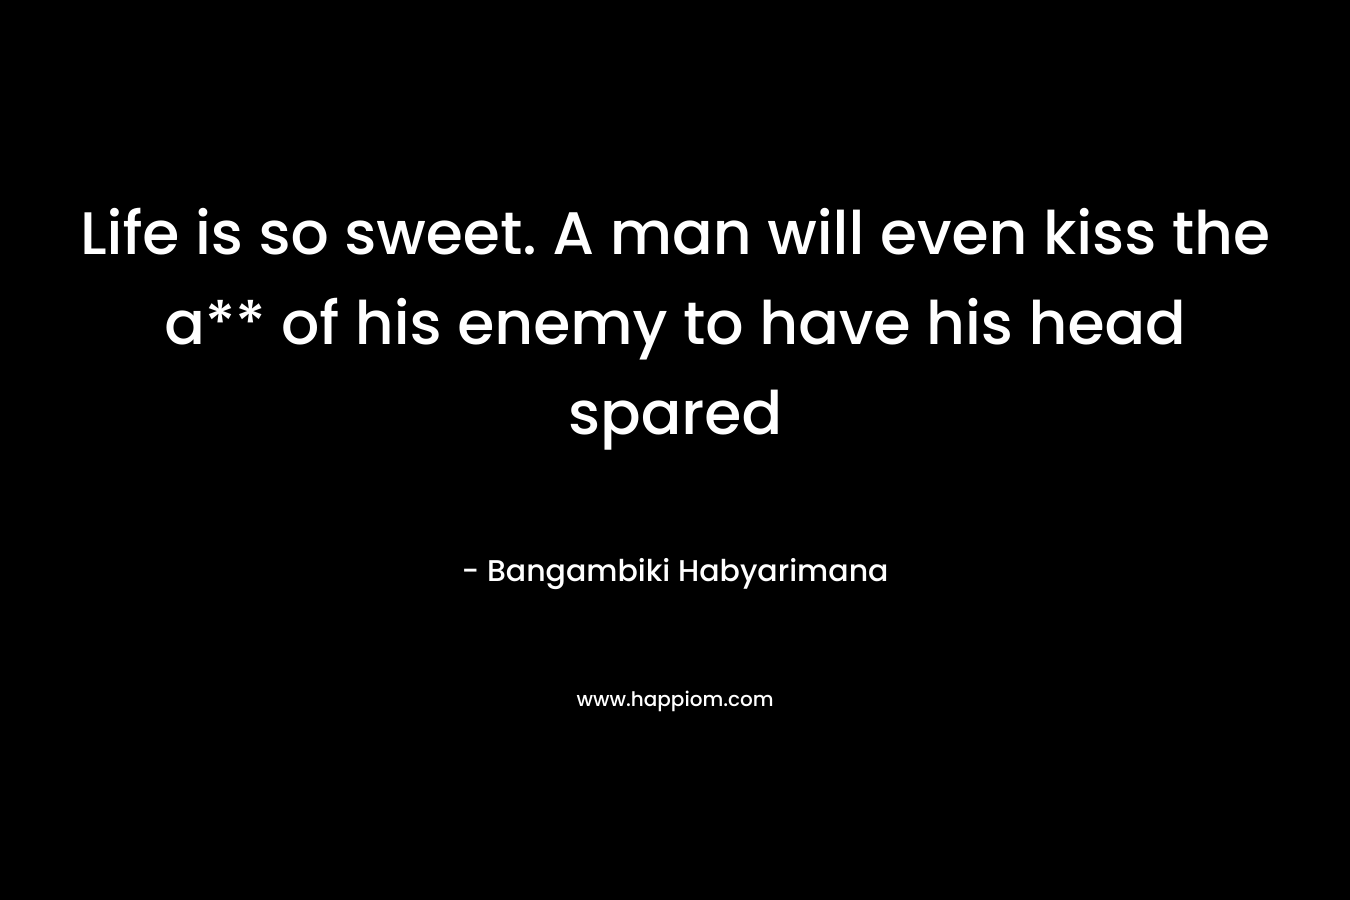 Life is so sweet. A man will even kiss the a** of his enemy to have his head spared